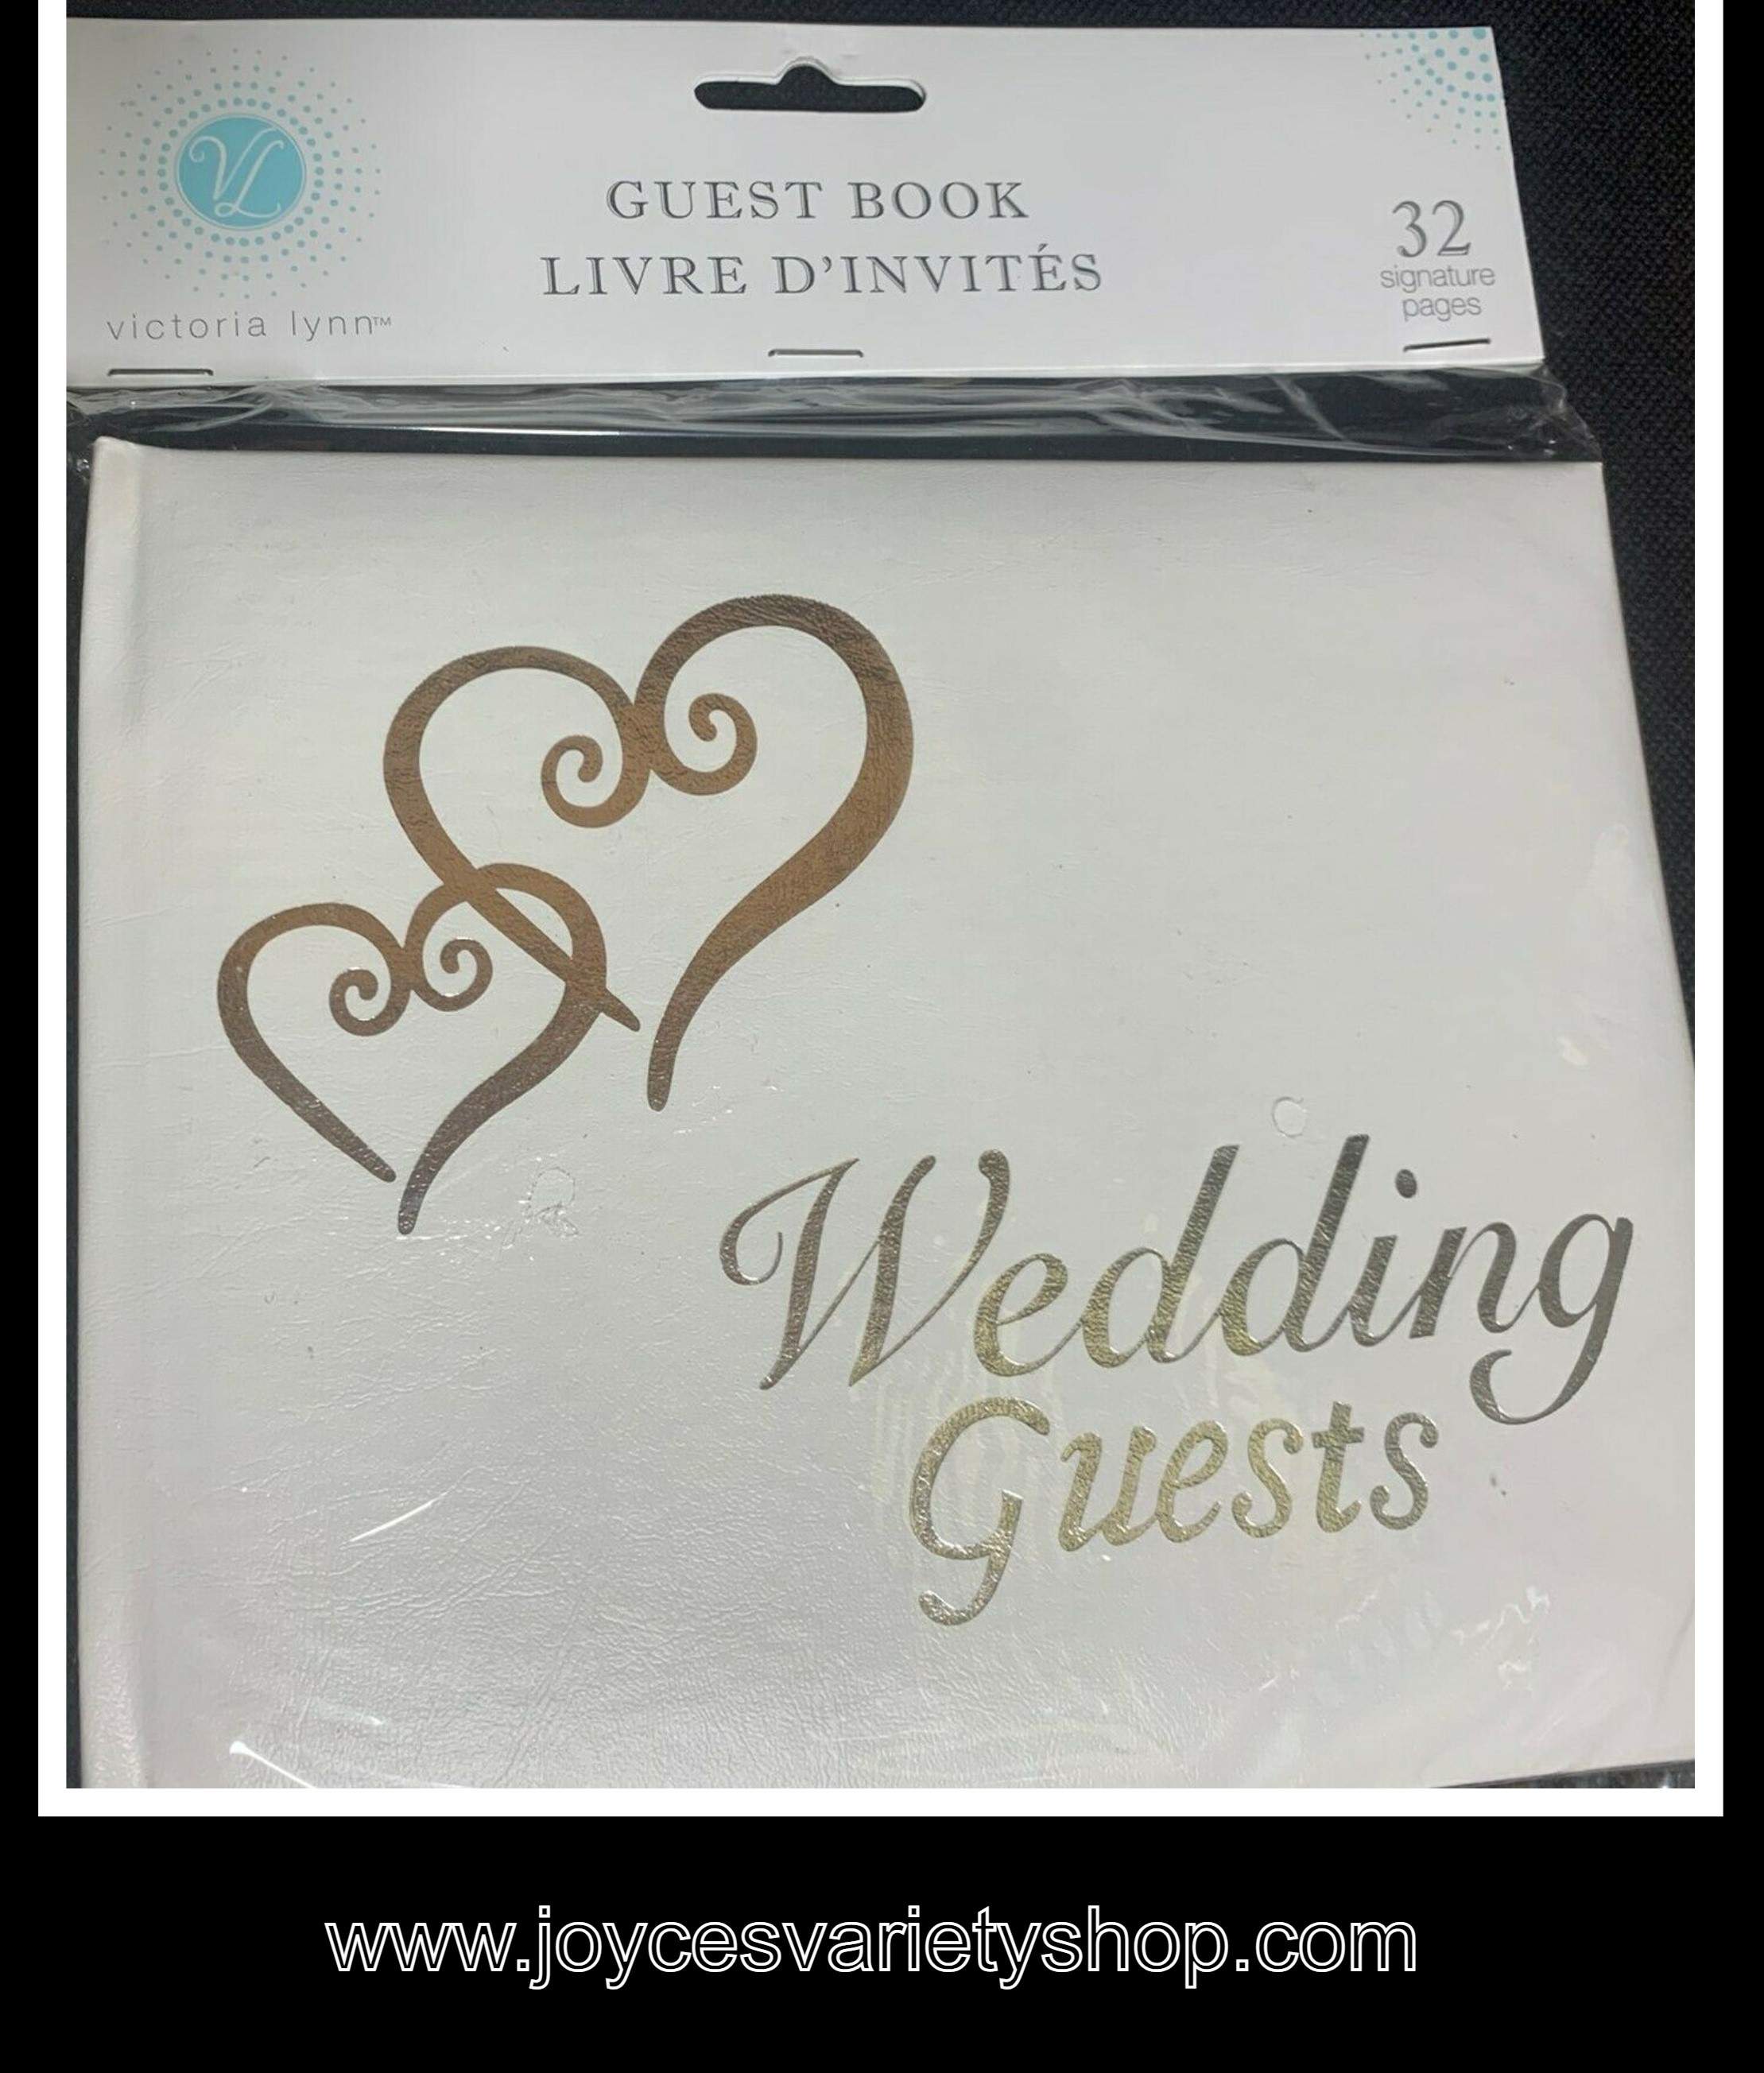 Silver Hearts Wedding Guests Book 32 Signature Pages Victoria Lynn